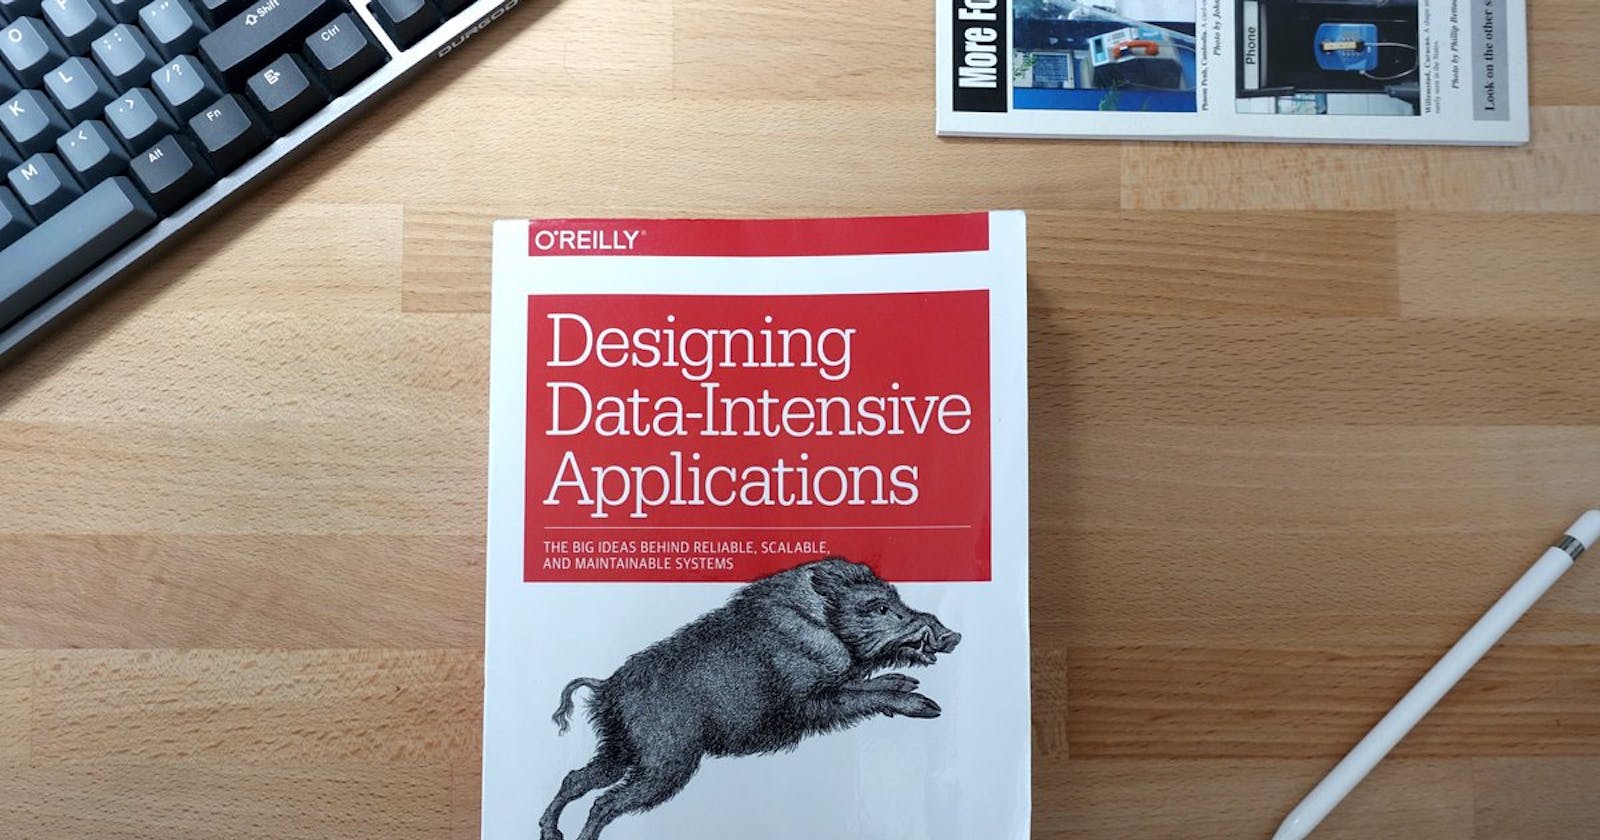 Designing Data Intensive Applications: Ch1. Reliable, Scalable and Maintainable Applications